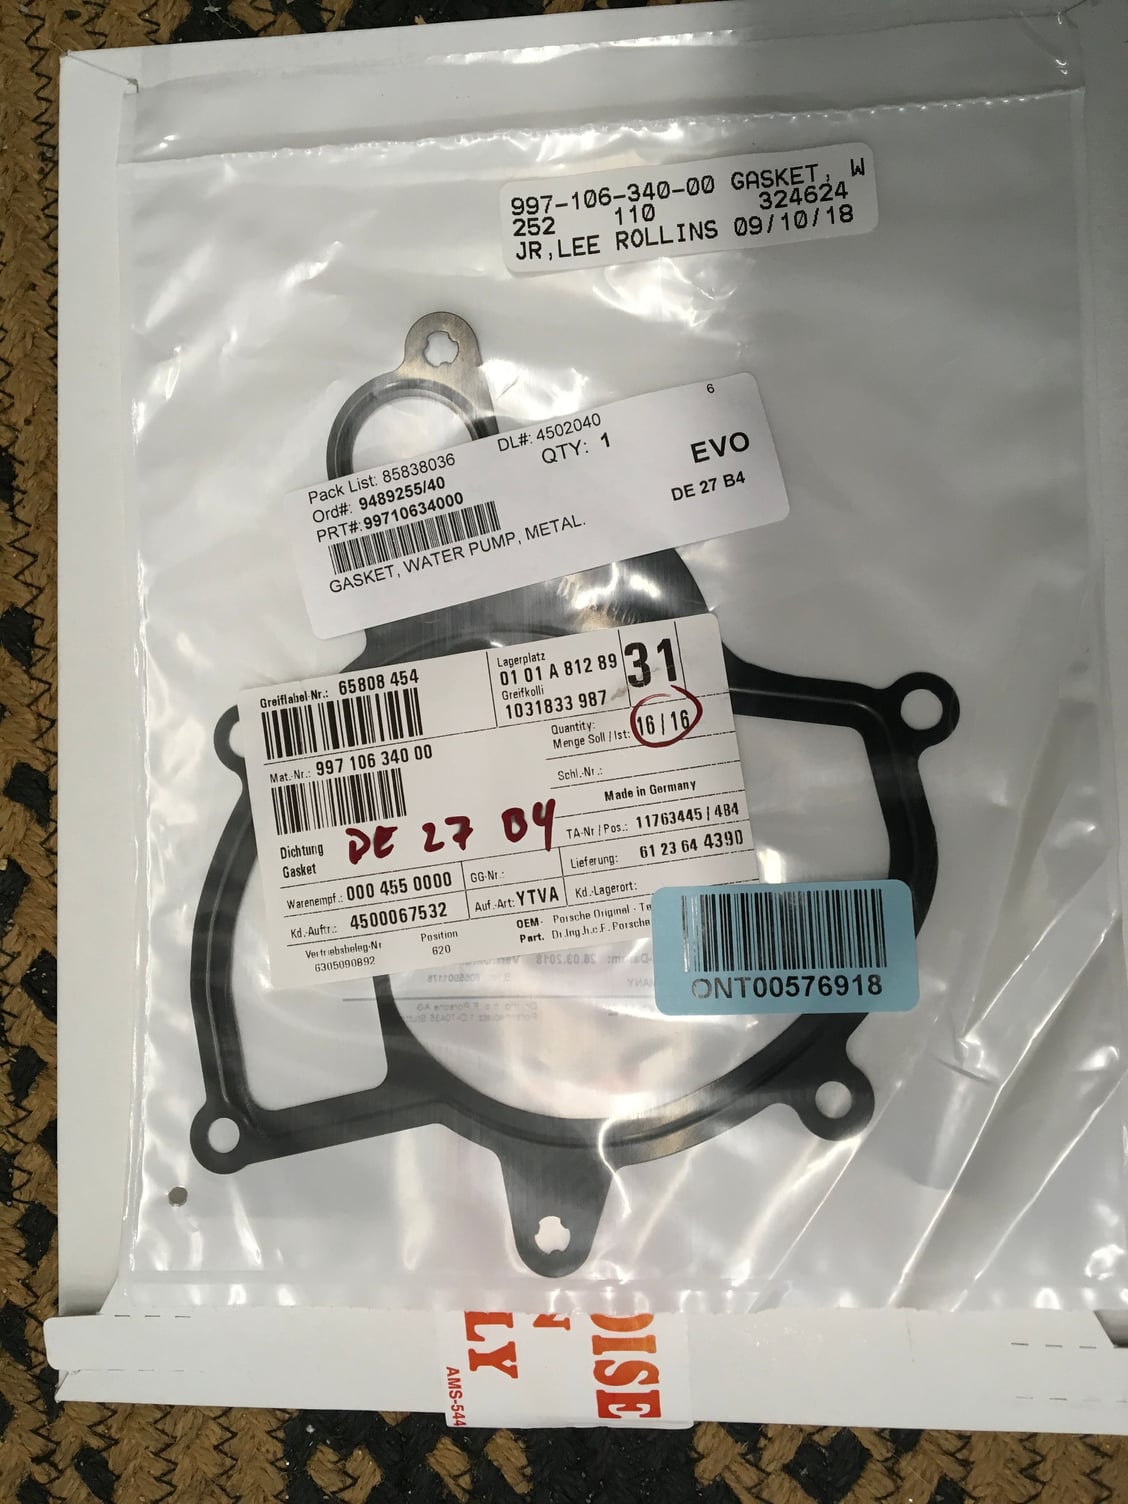 Miscellaneous - Porsche Cayman S 987.1 Water Pump and Gasket - New - 2006 to 2008 Porsche Cayman - Wells, ME 04090, United States